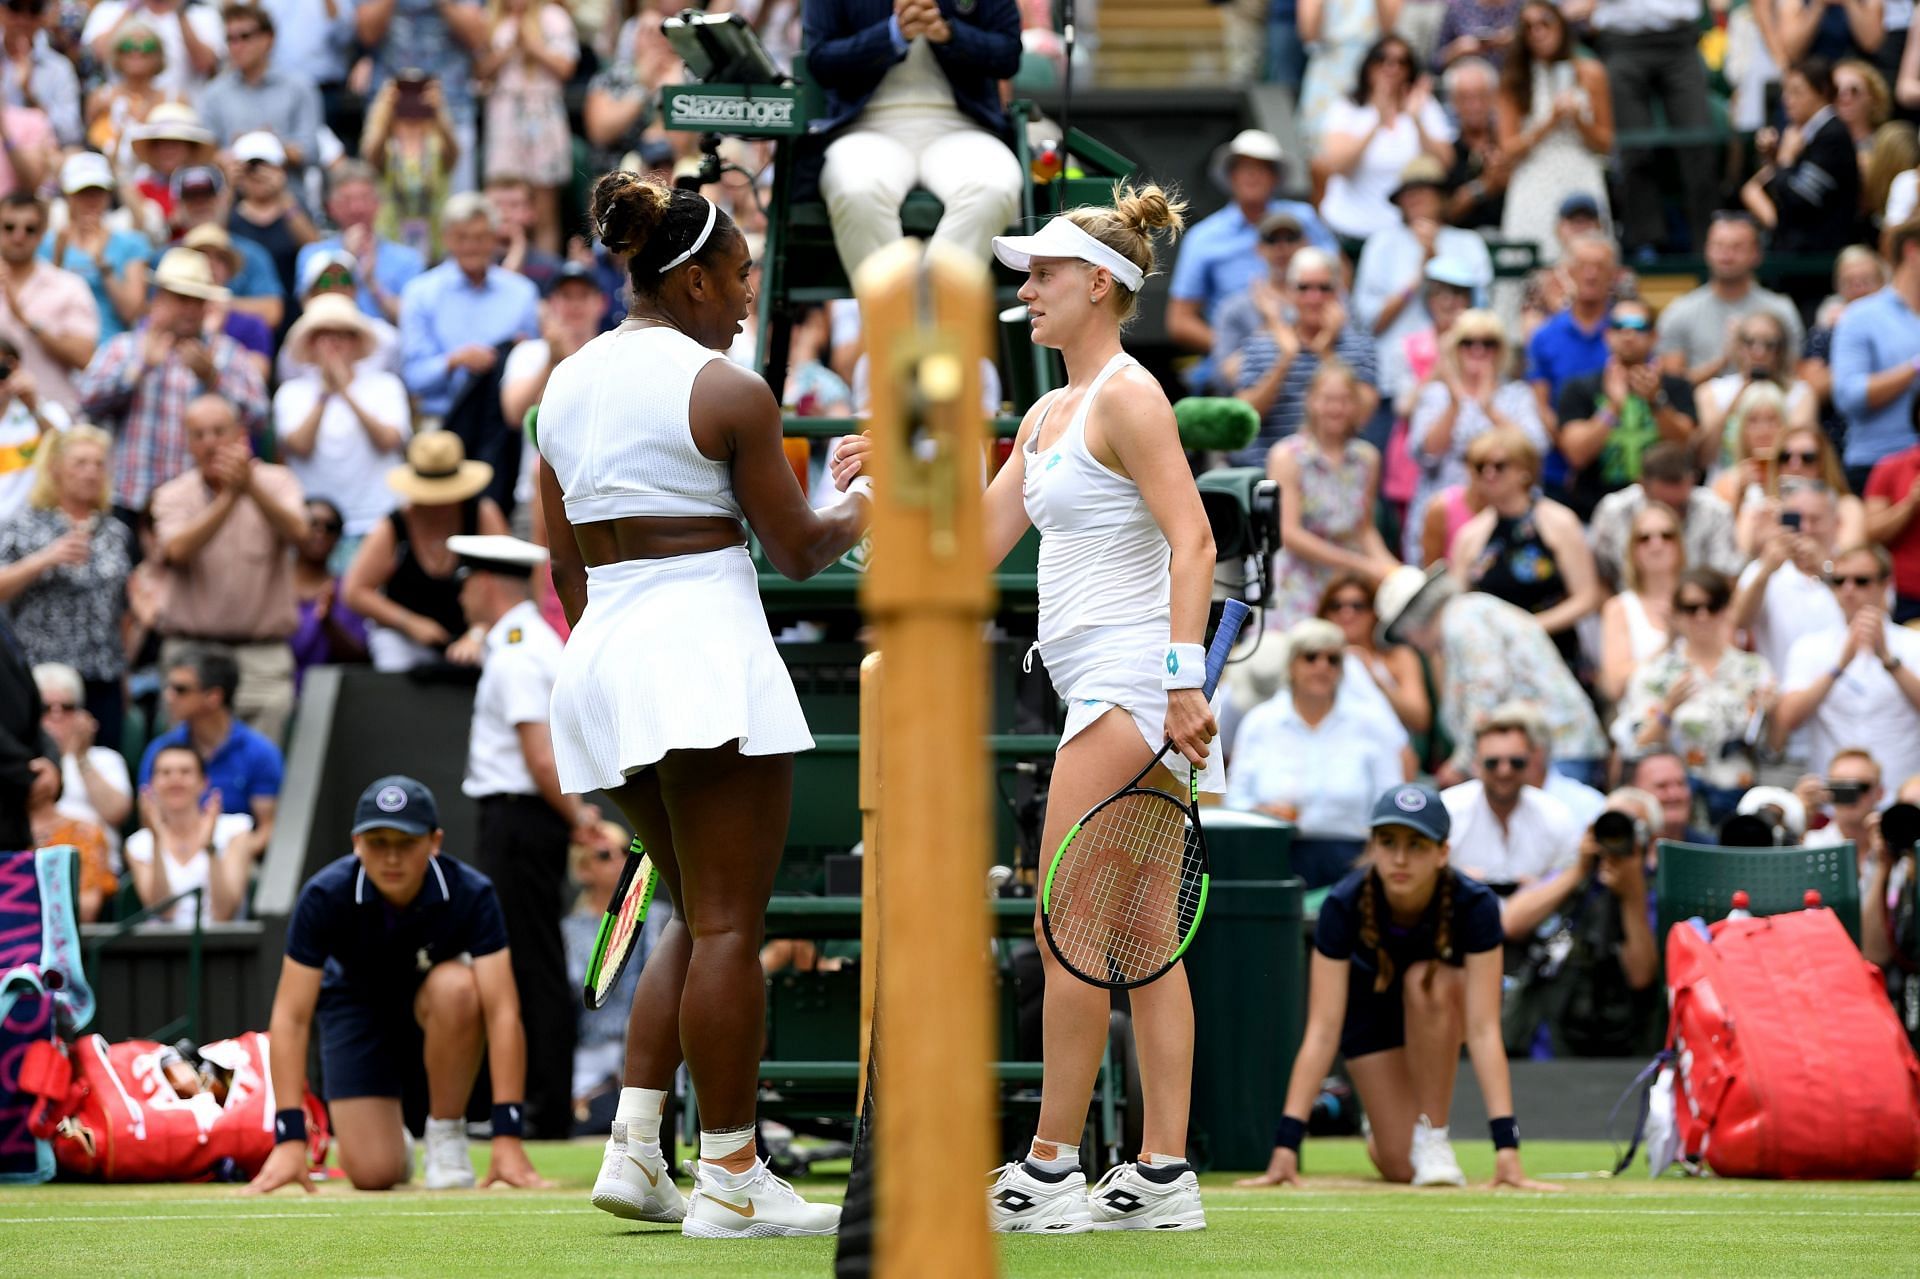 Alison Riske after losing to Serena Williams in the 2019 QF at Wimbledon